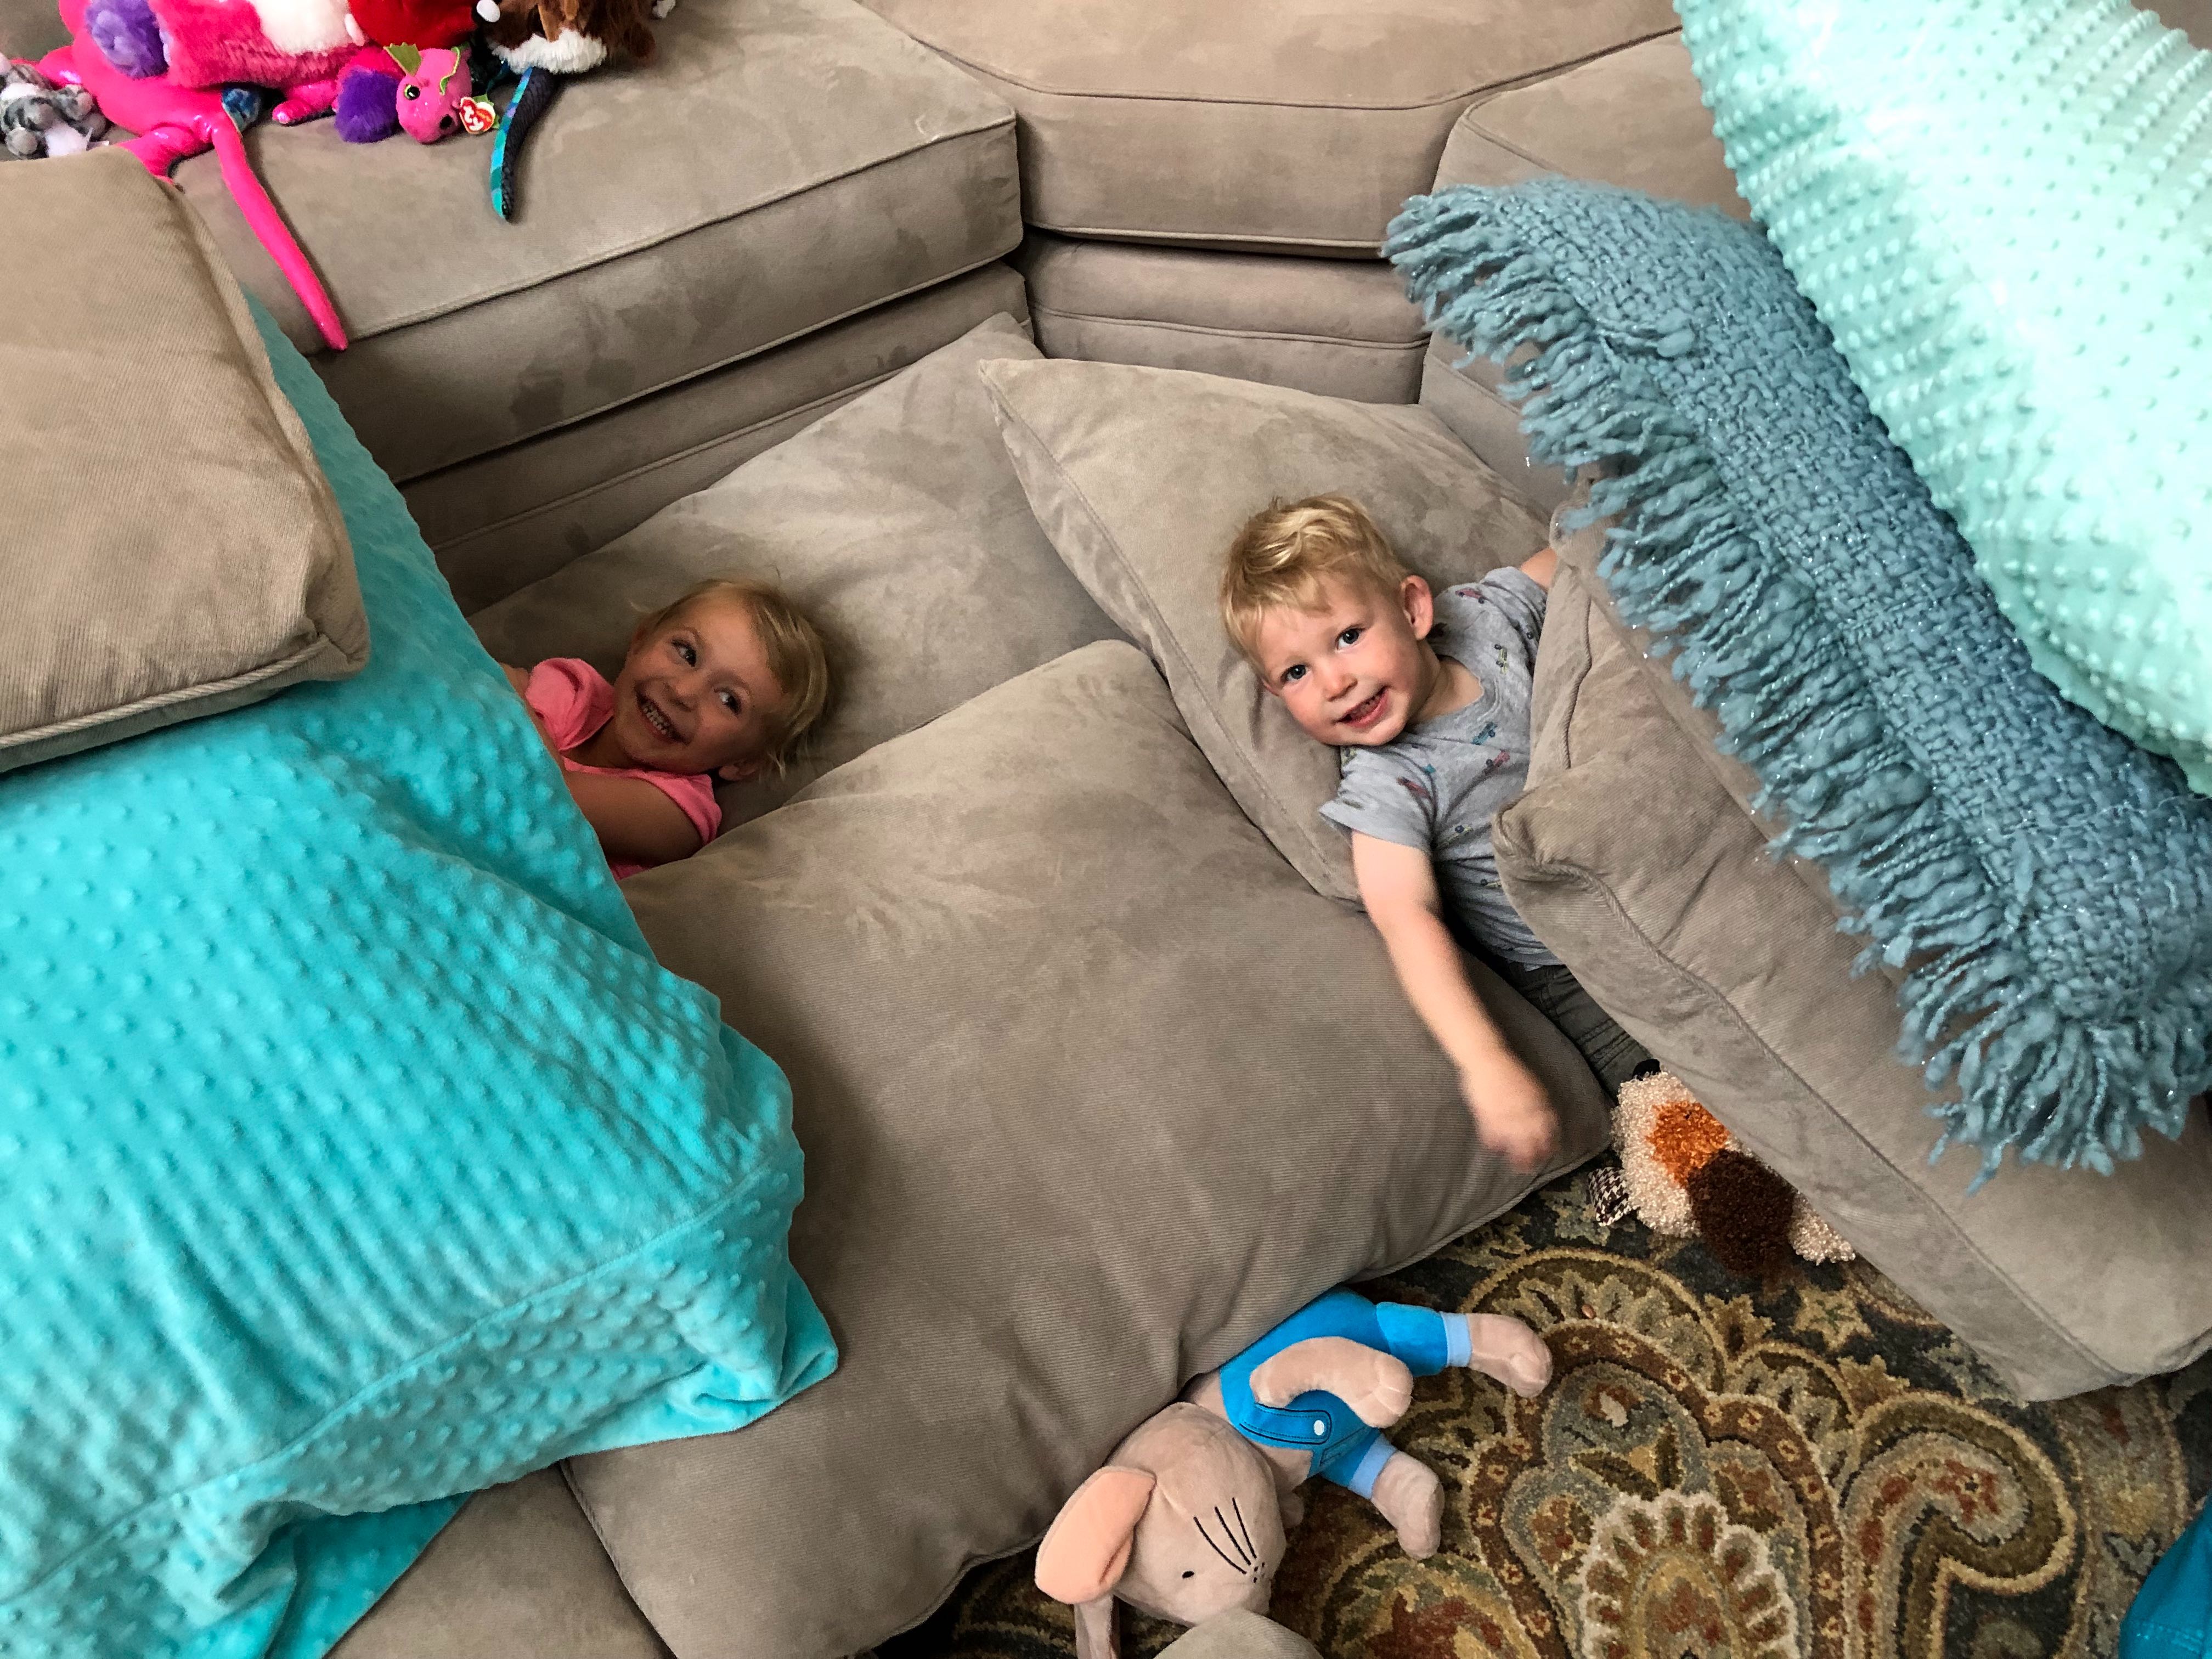 Two children hiding out under mattress and pillows with big smiles on their faces.